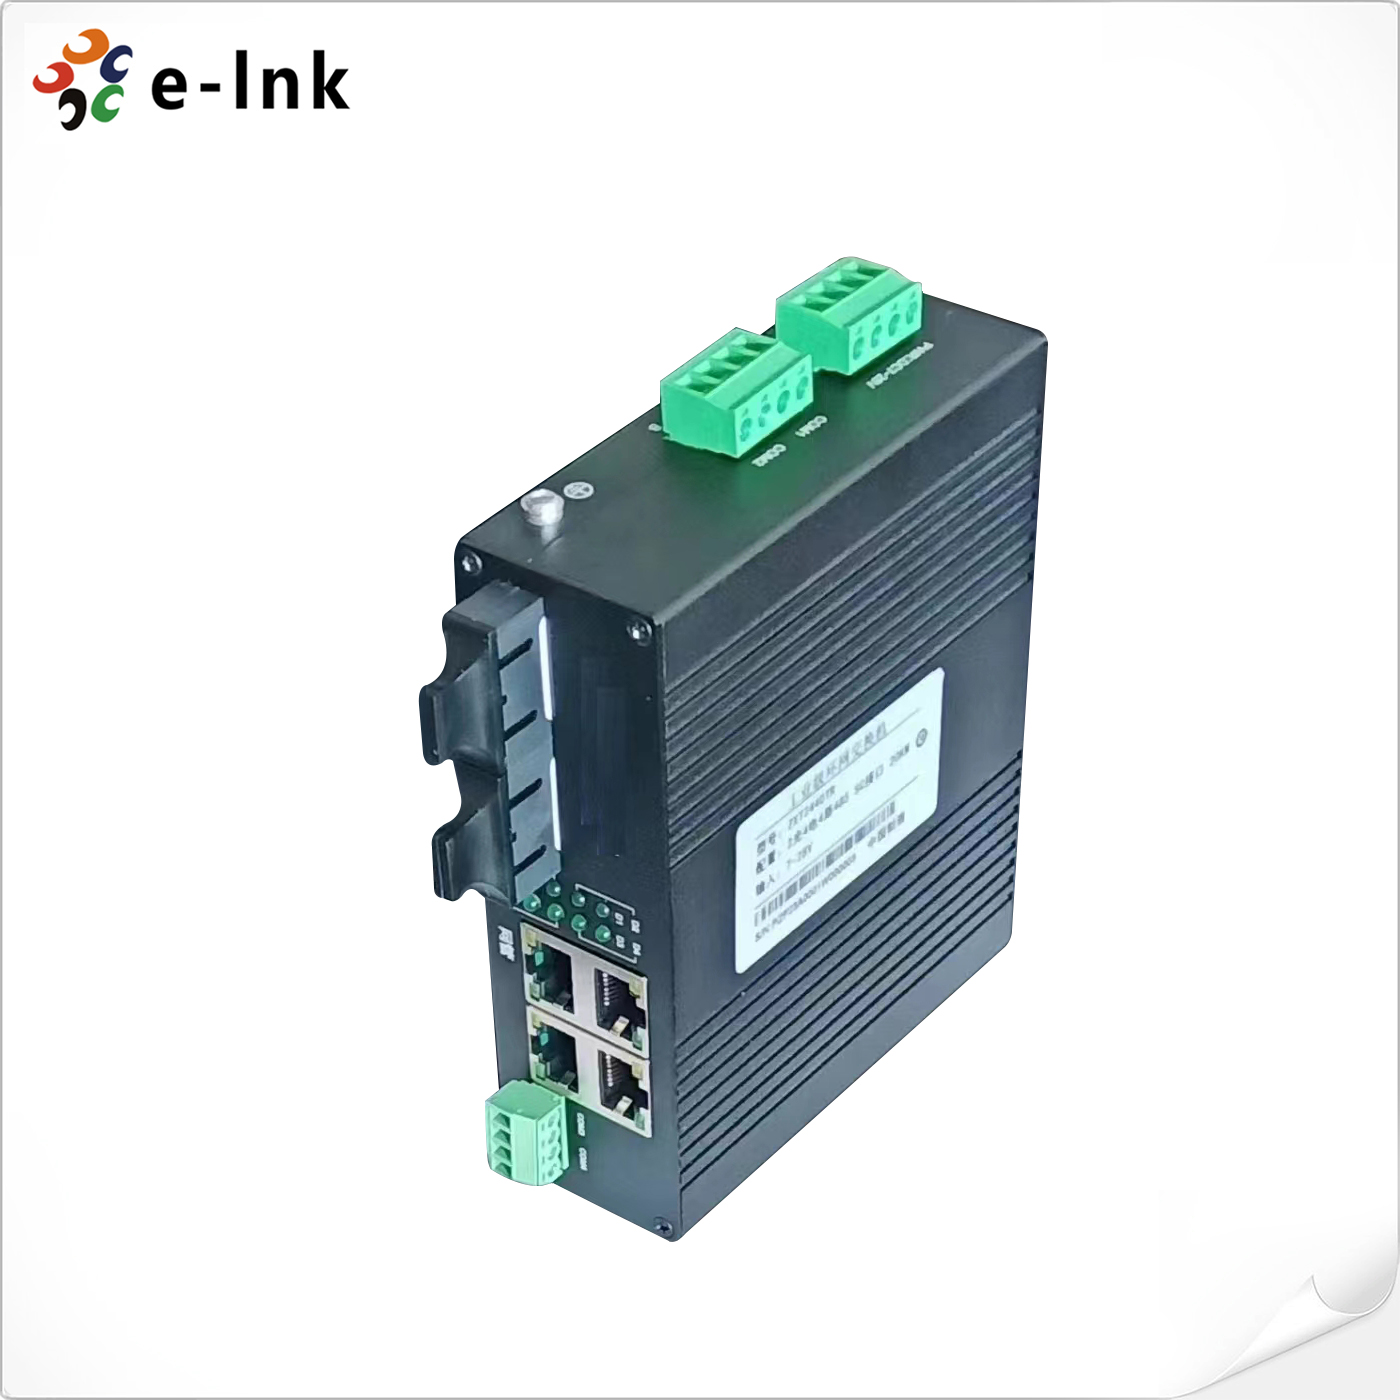 L2+ Industrial 4x10/100TX + 4xRS485 + 2x100FX Ring Managed Ethernet Switch